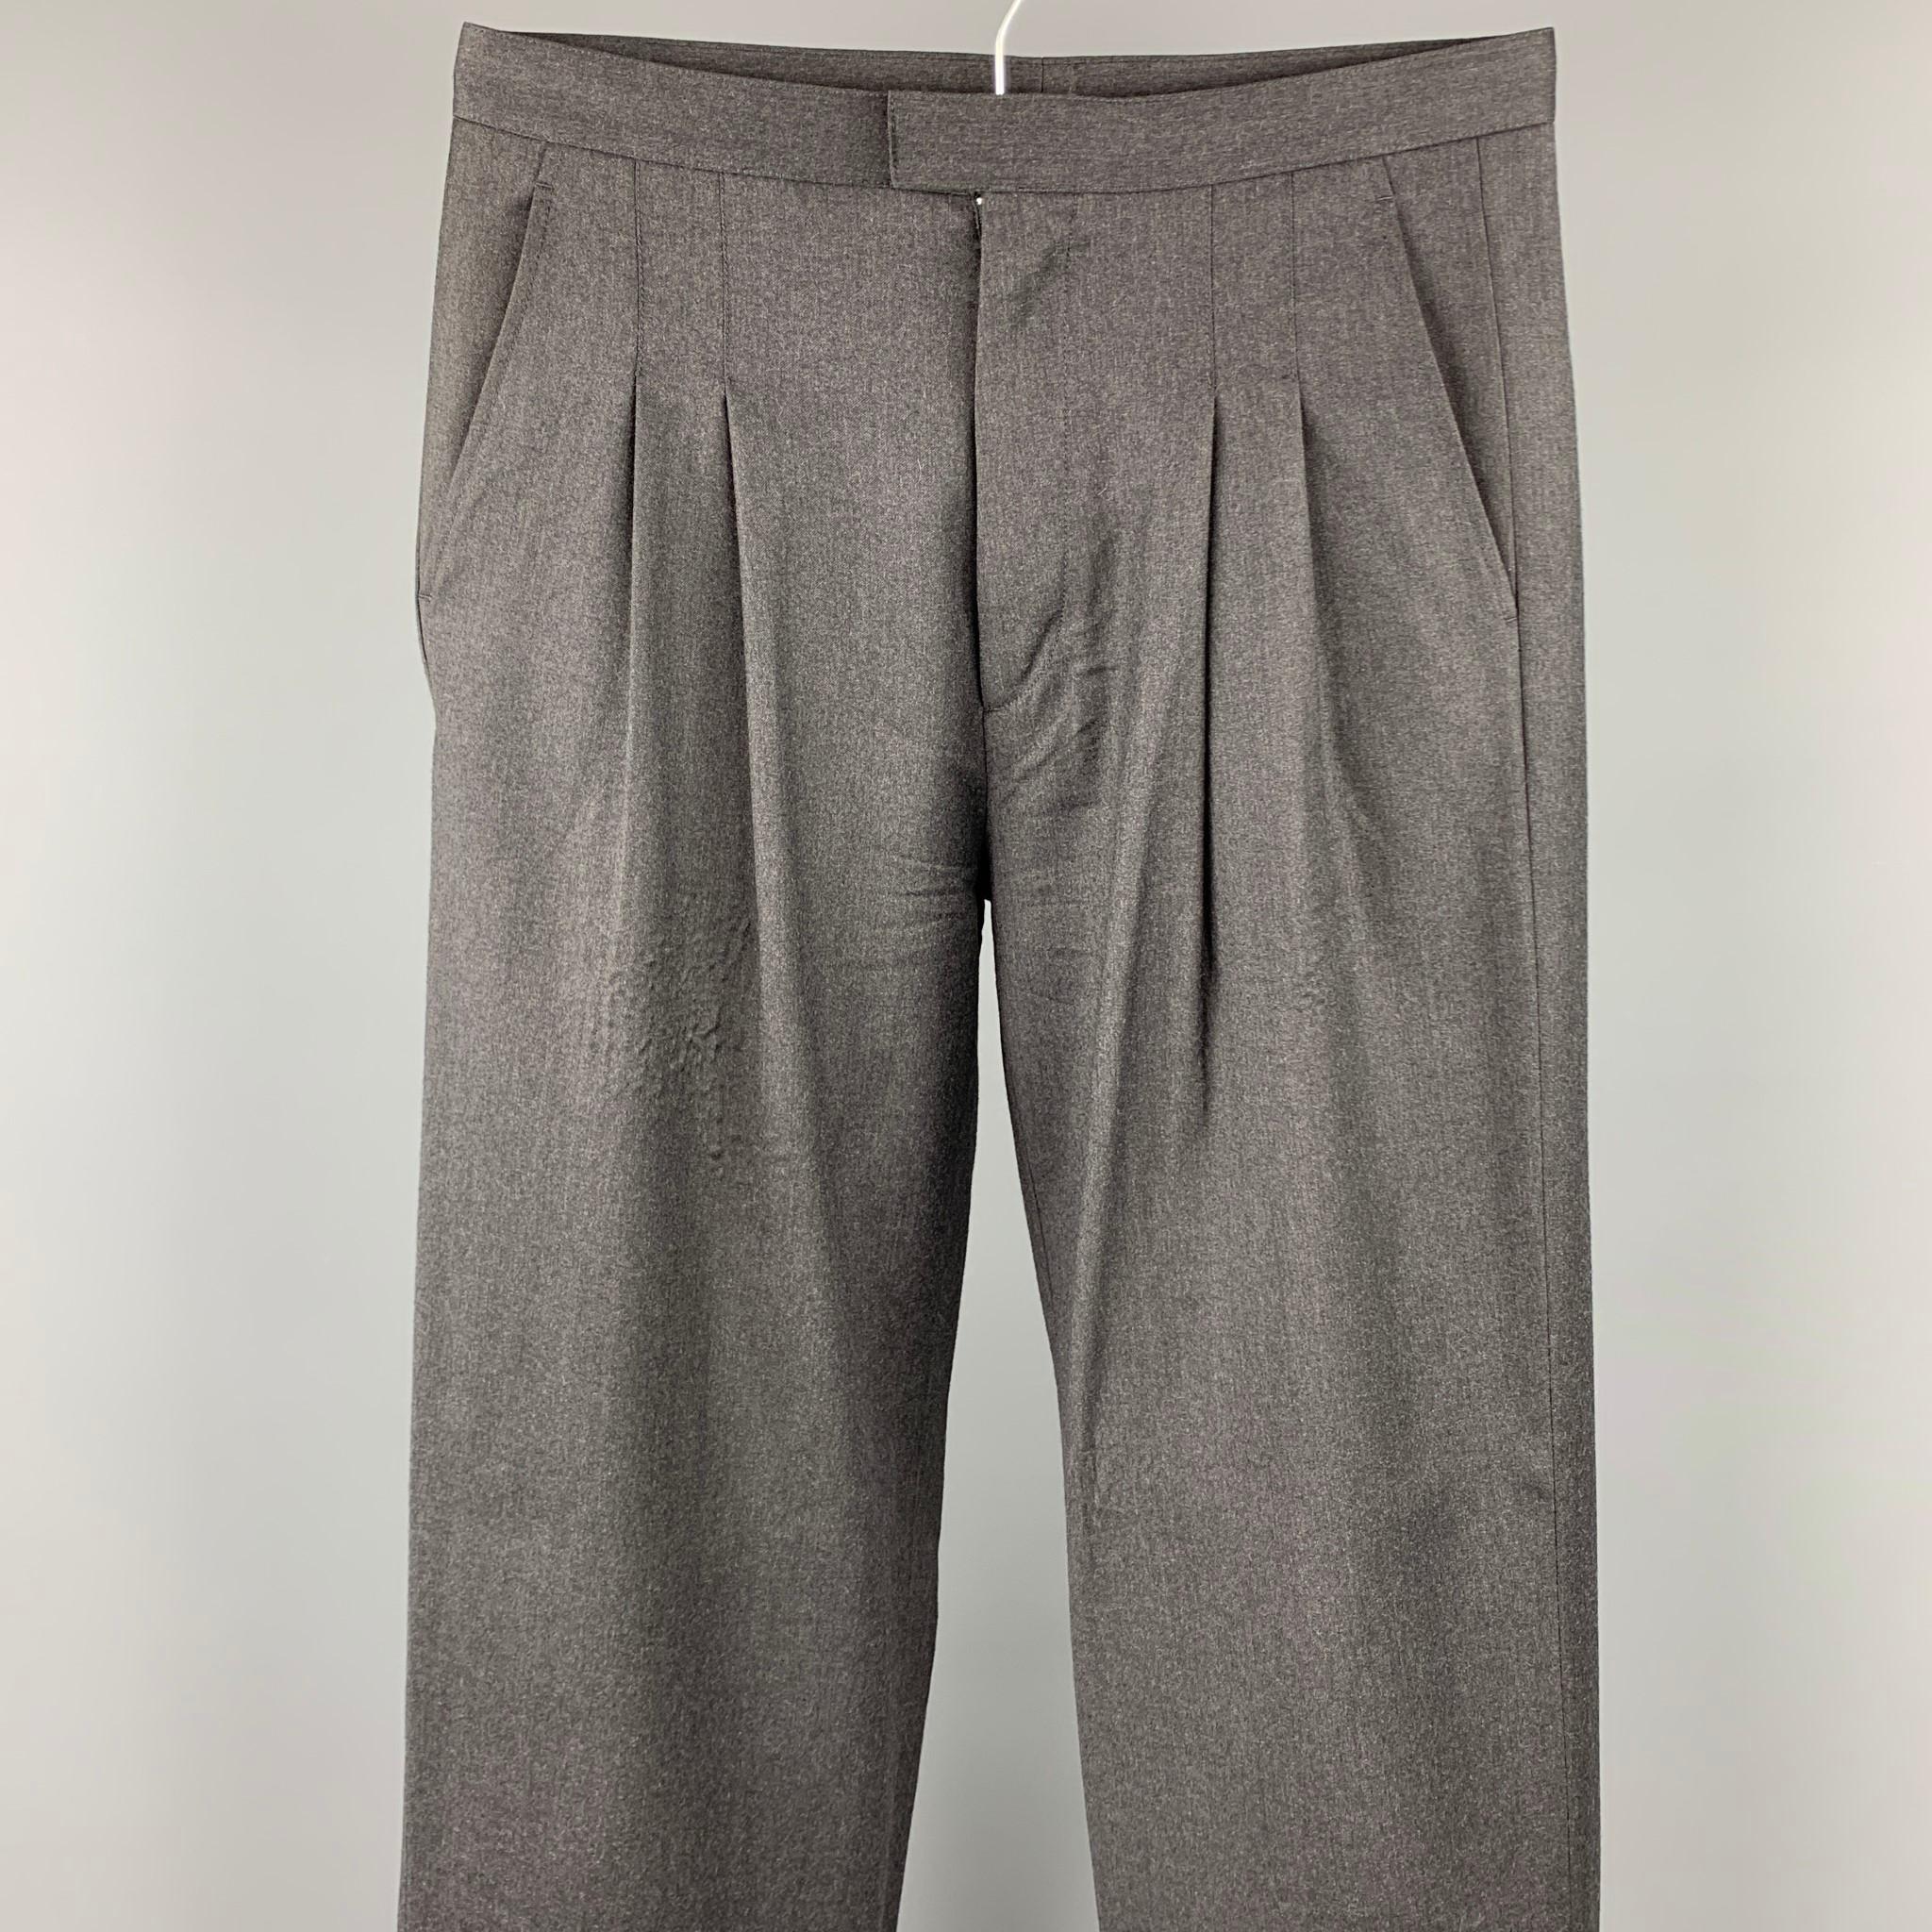 CALVIN KLEIN COLLECTION dress pants comes in a charcoal wool featuring a pleated style, front tab, and a zip fly closure. 

Very Good Pre-Owned Condition.
Marked: 46/30

Measurements:

Waist: 32 in.
Rise: 11.5 in.
Inseam: 31 in. 